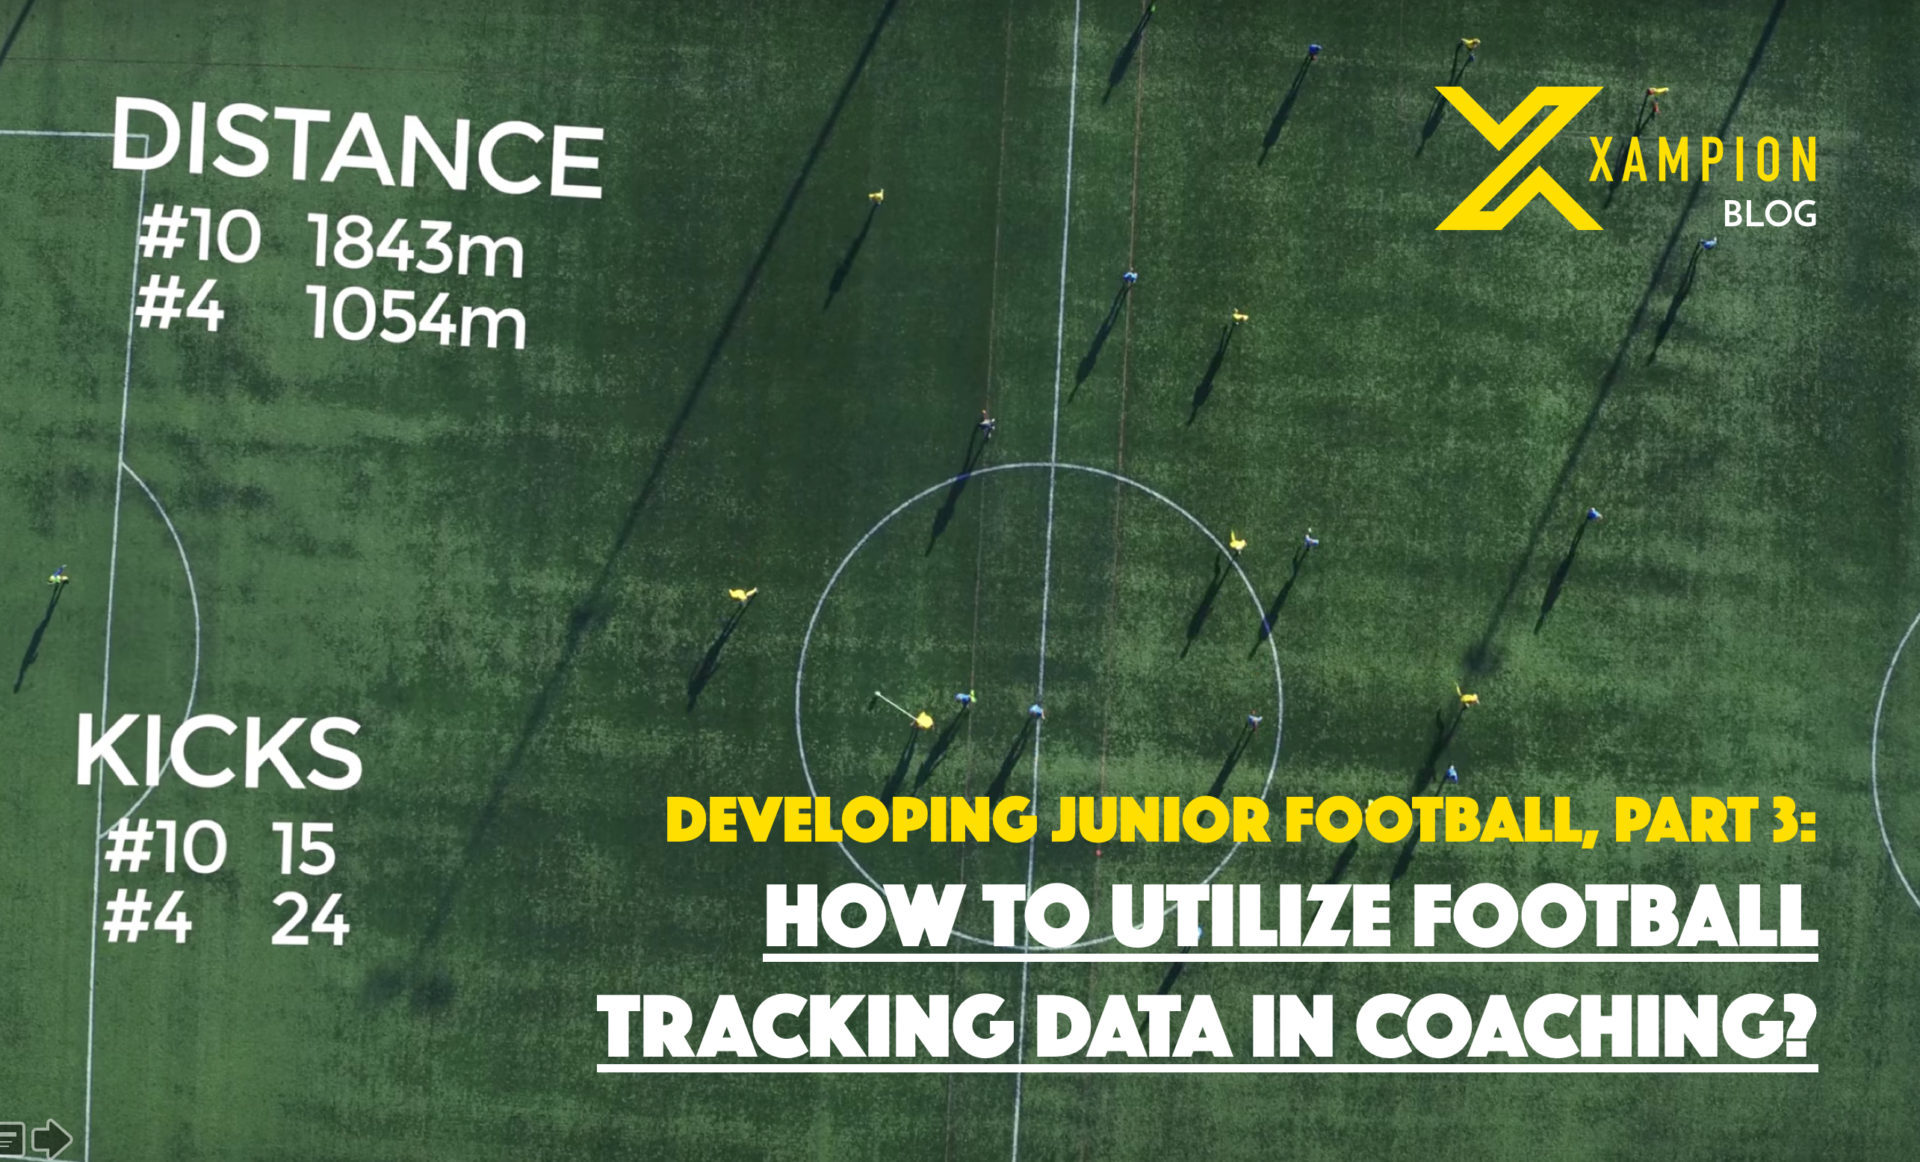 How to utilize football tracking data in coaching